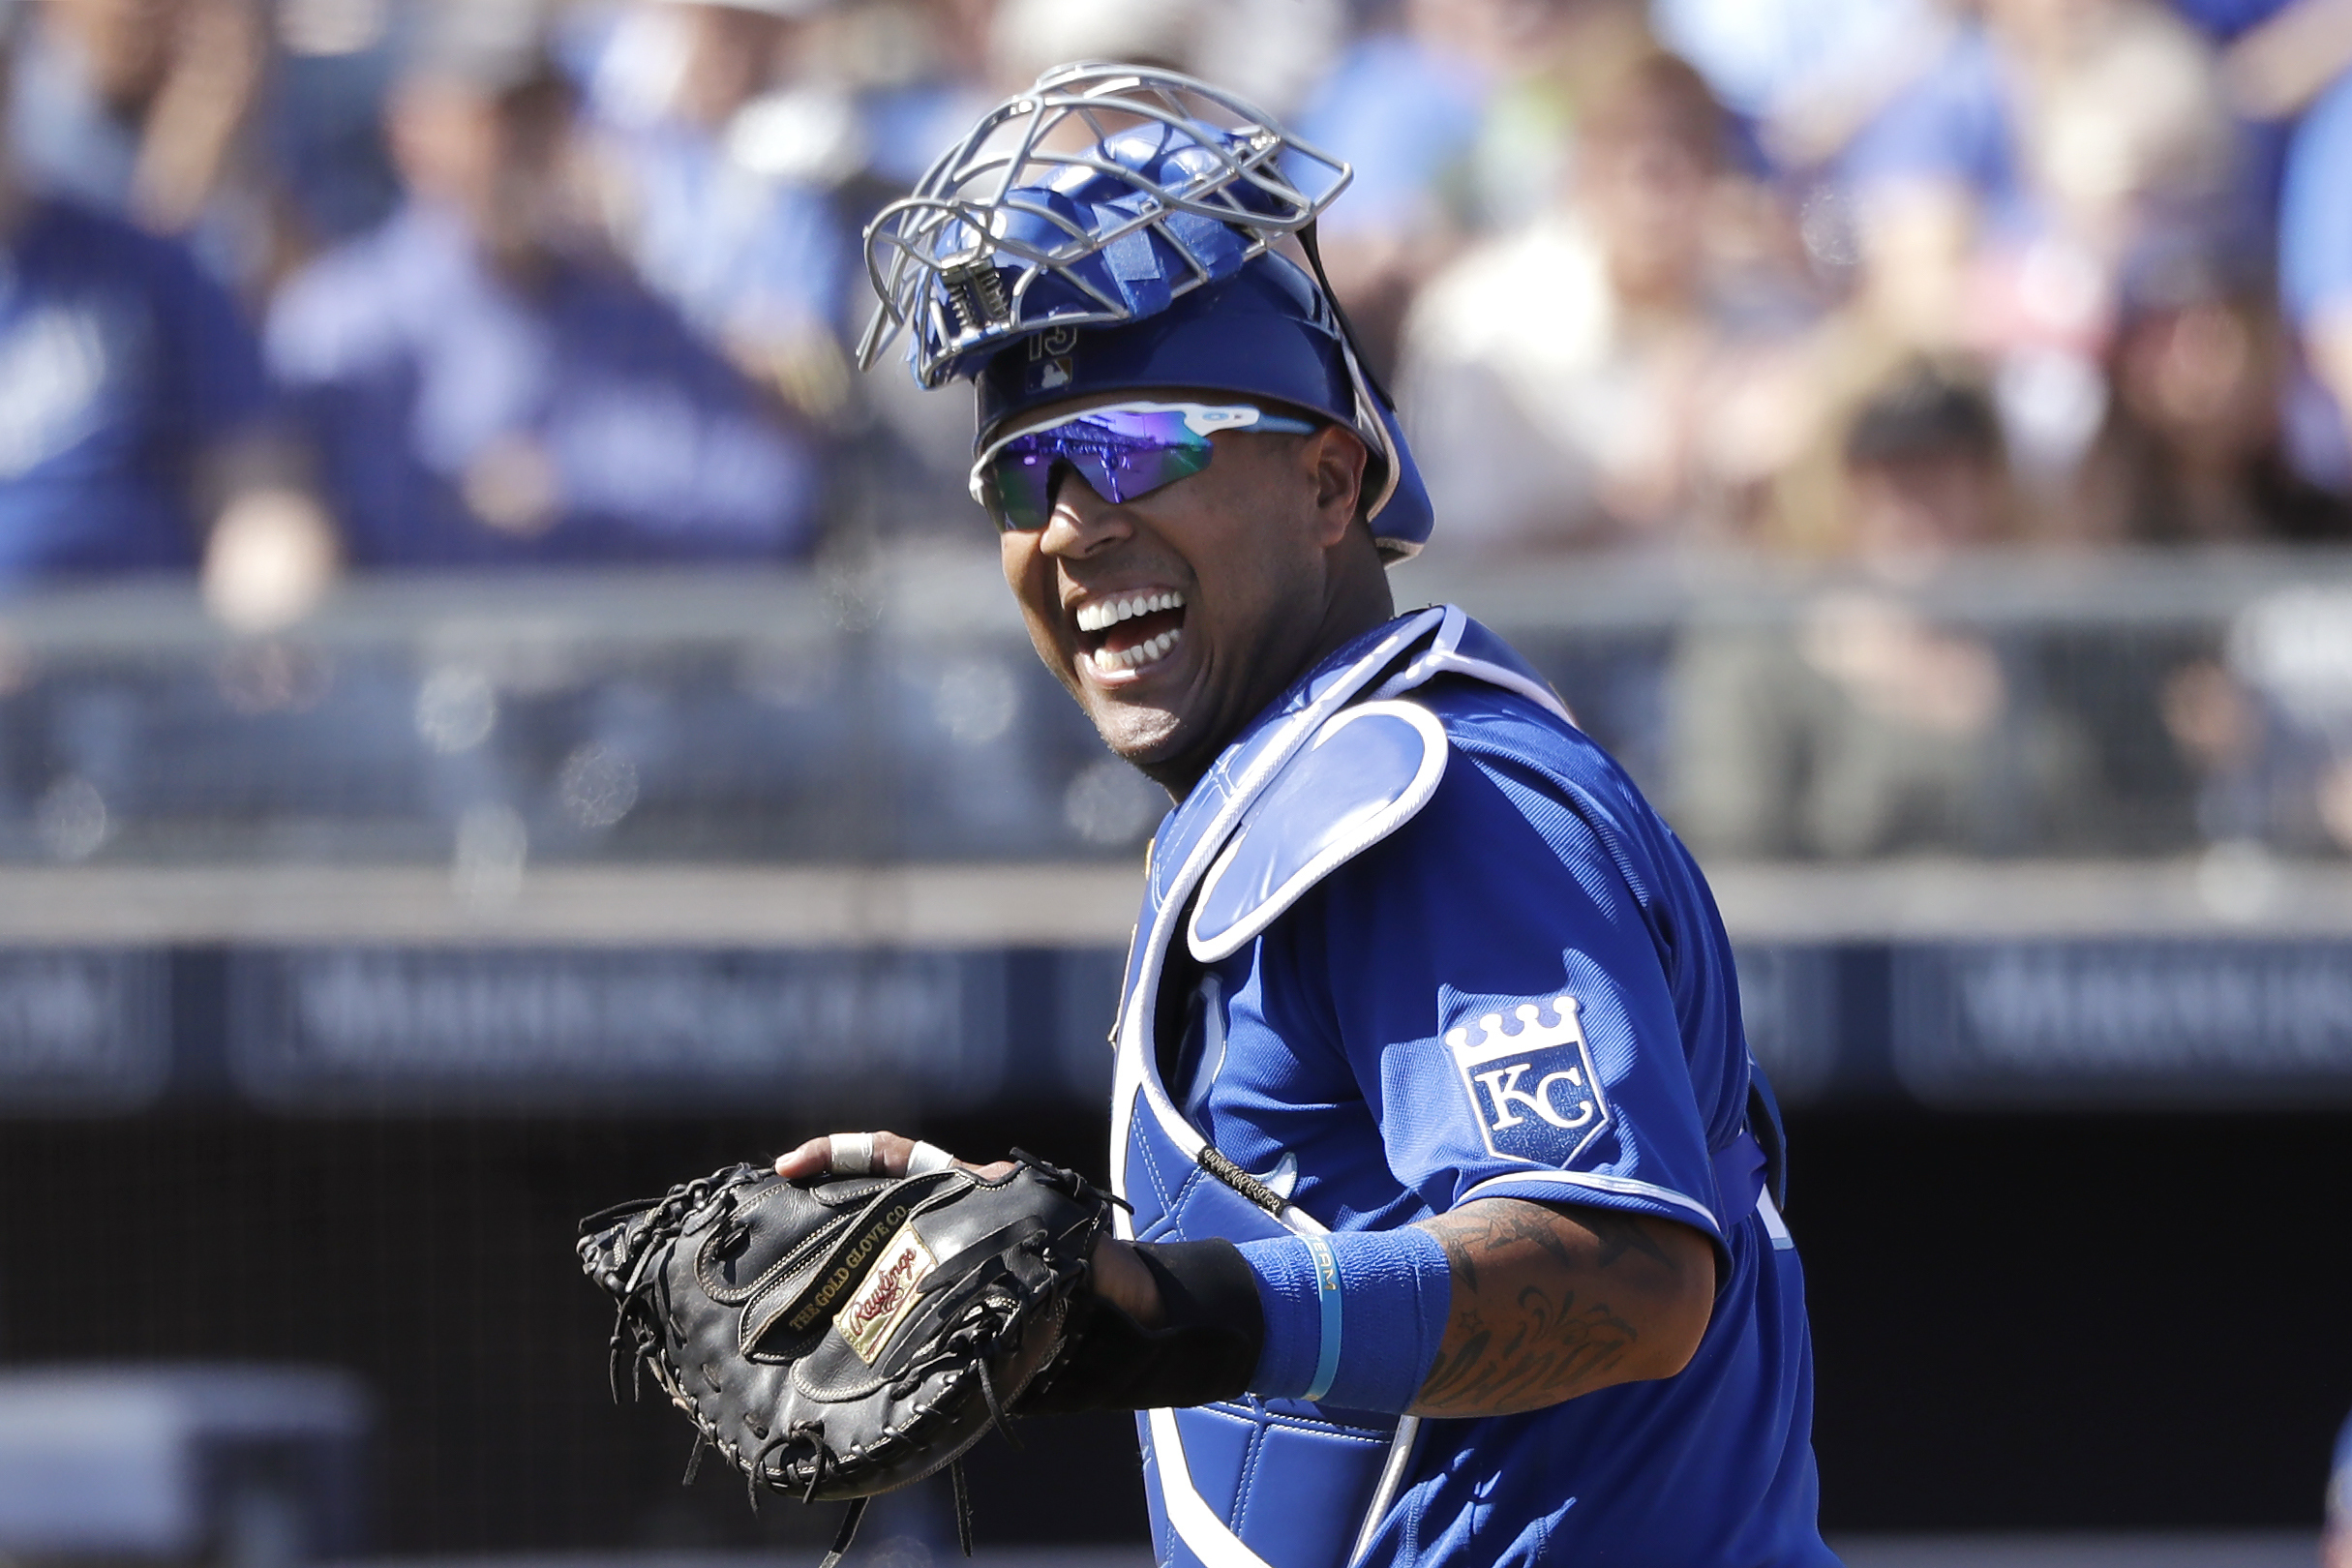 Royals give Pérez 4-year, $82M deal; richest in team history